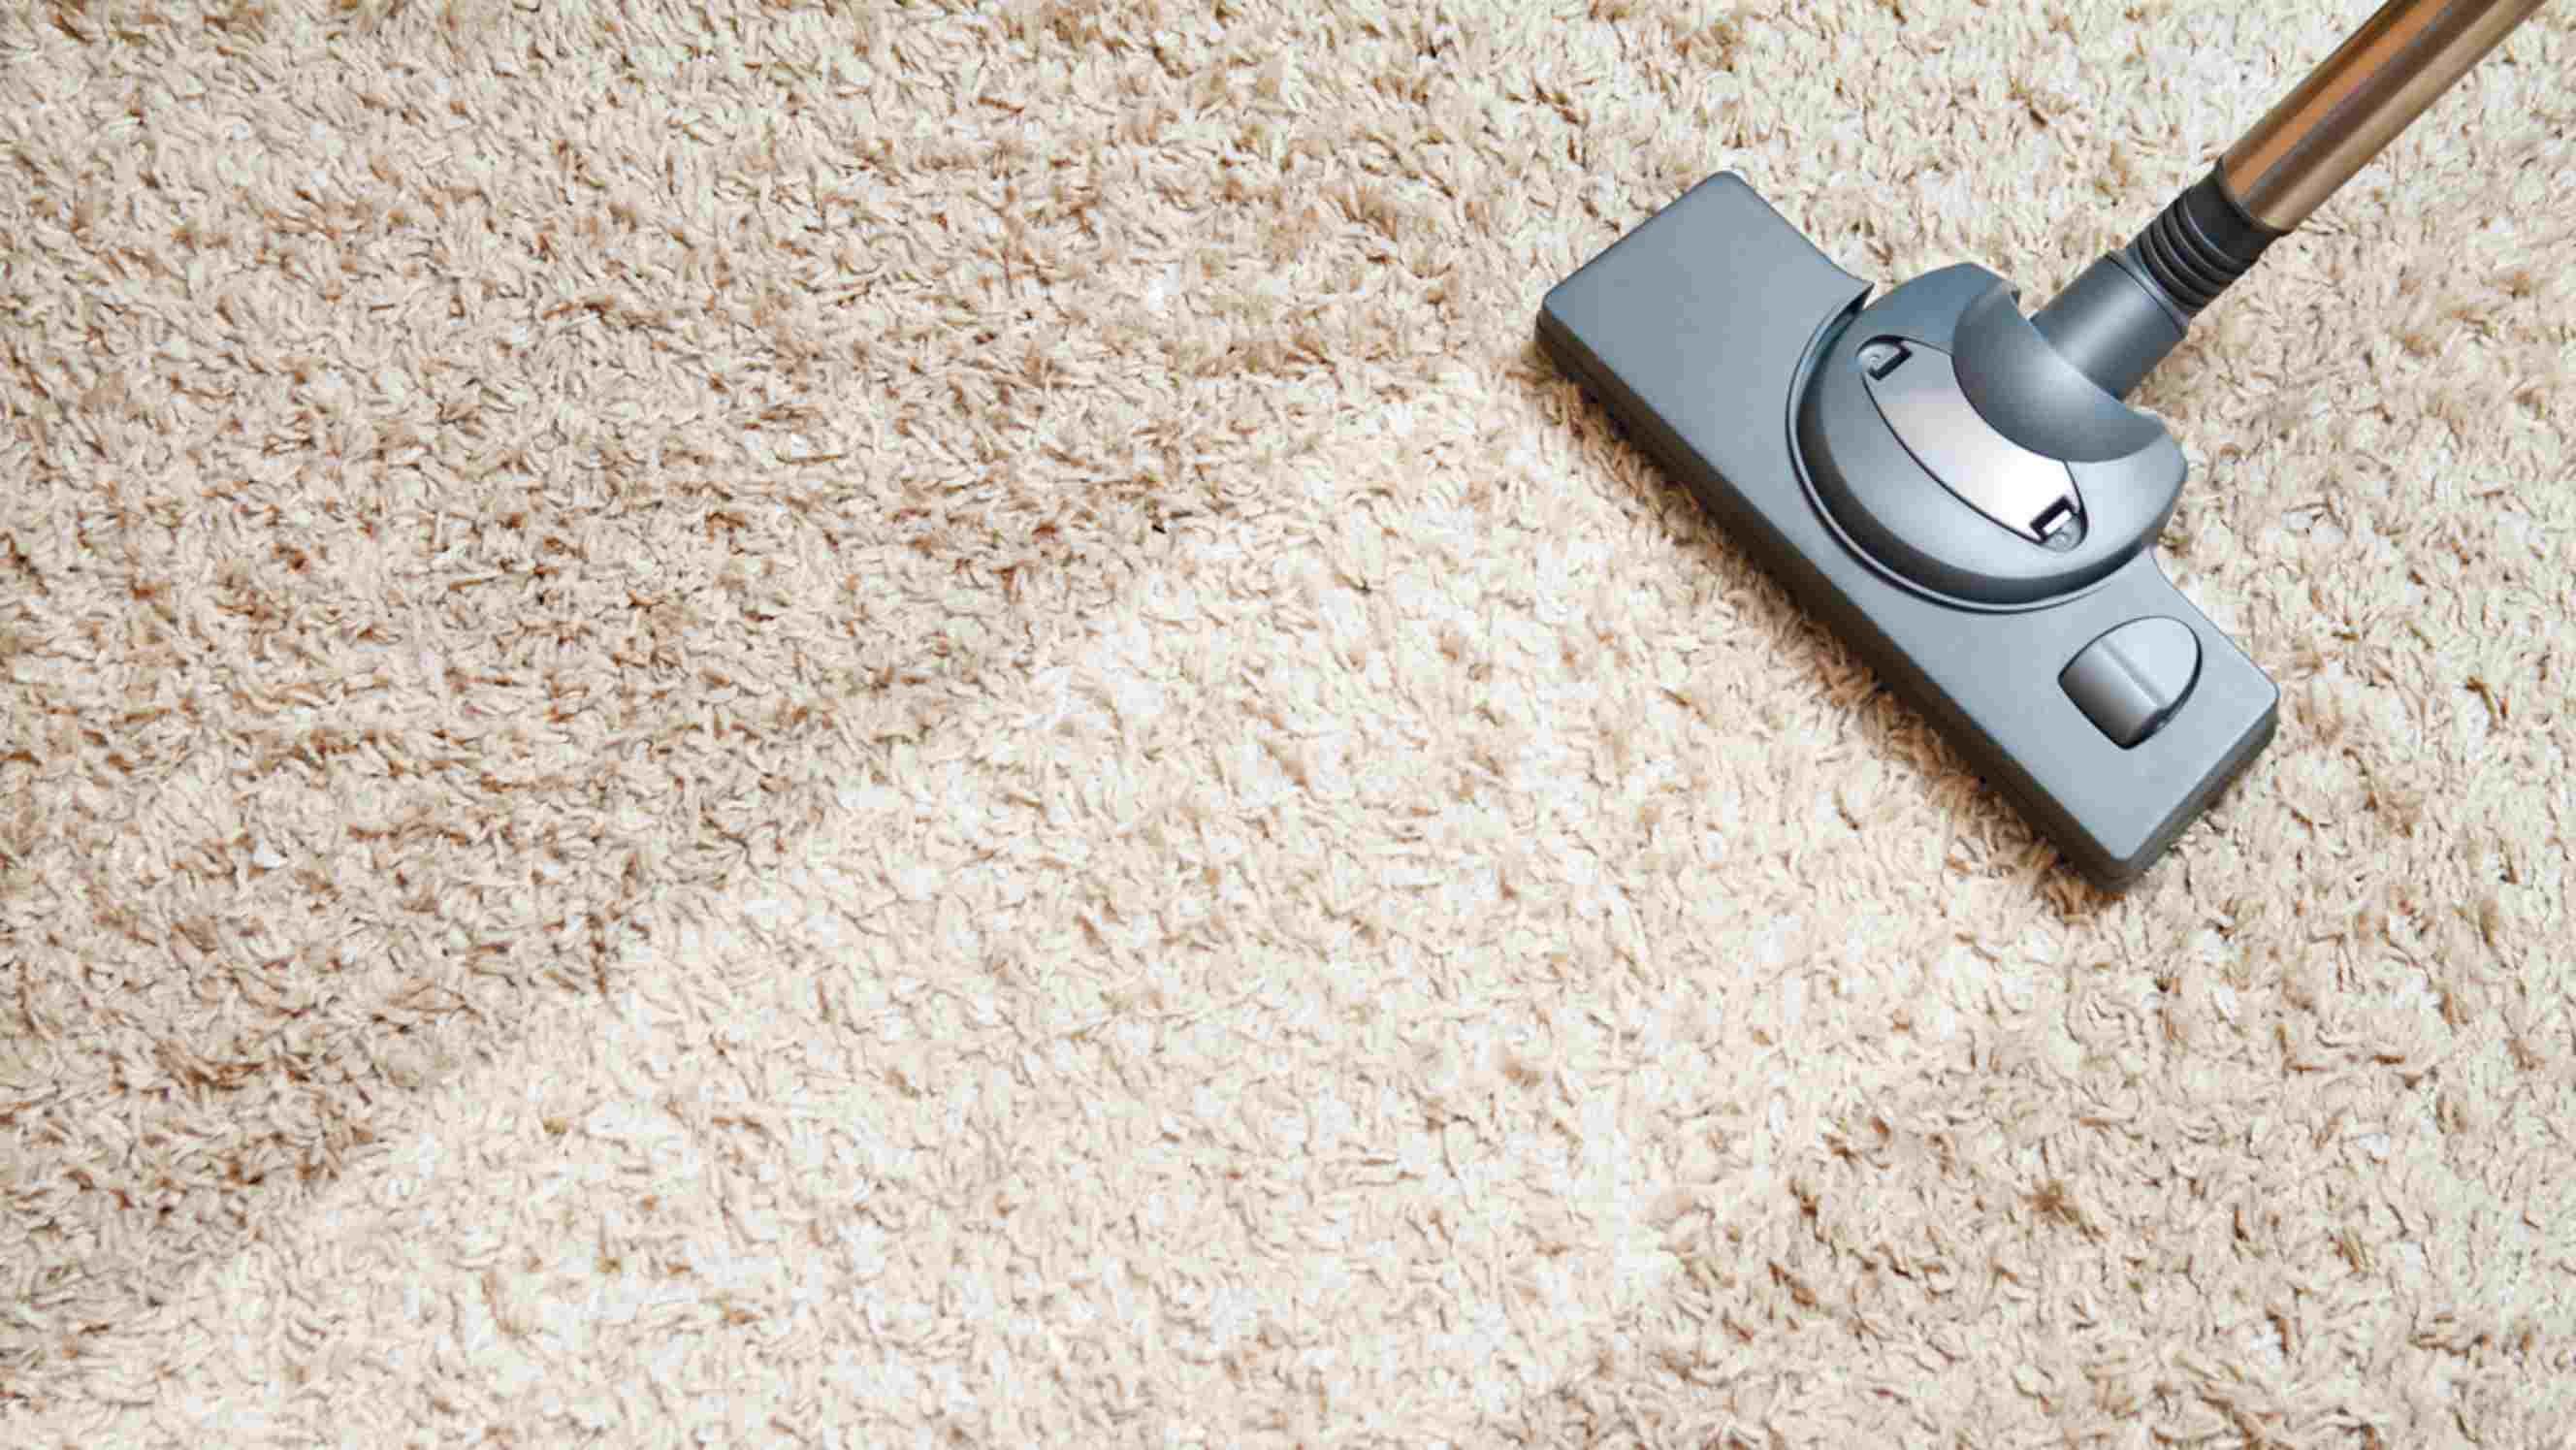 Steam cleaner vs carpet cleaner - a person using a carpet cleaner to clean a beige carpet